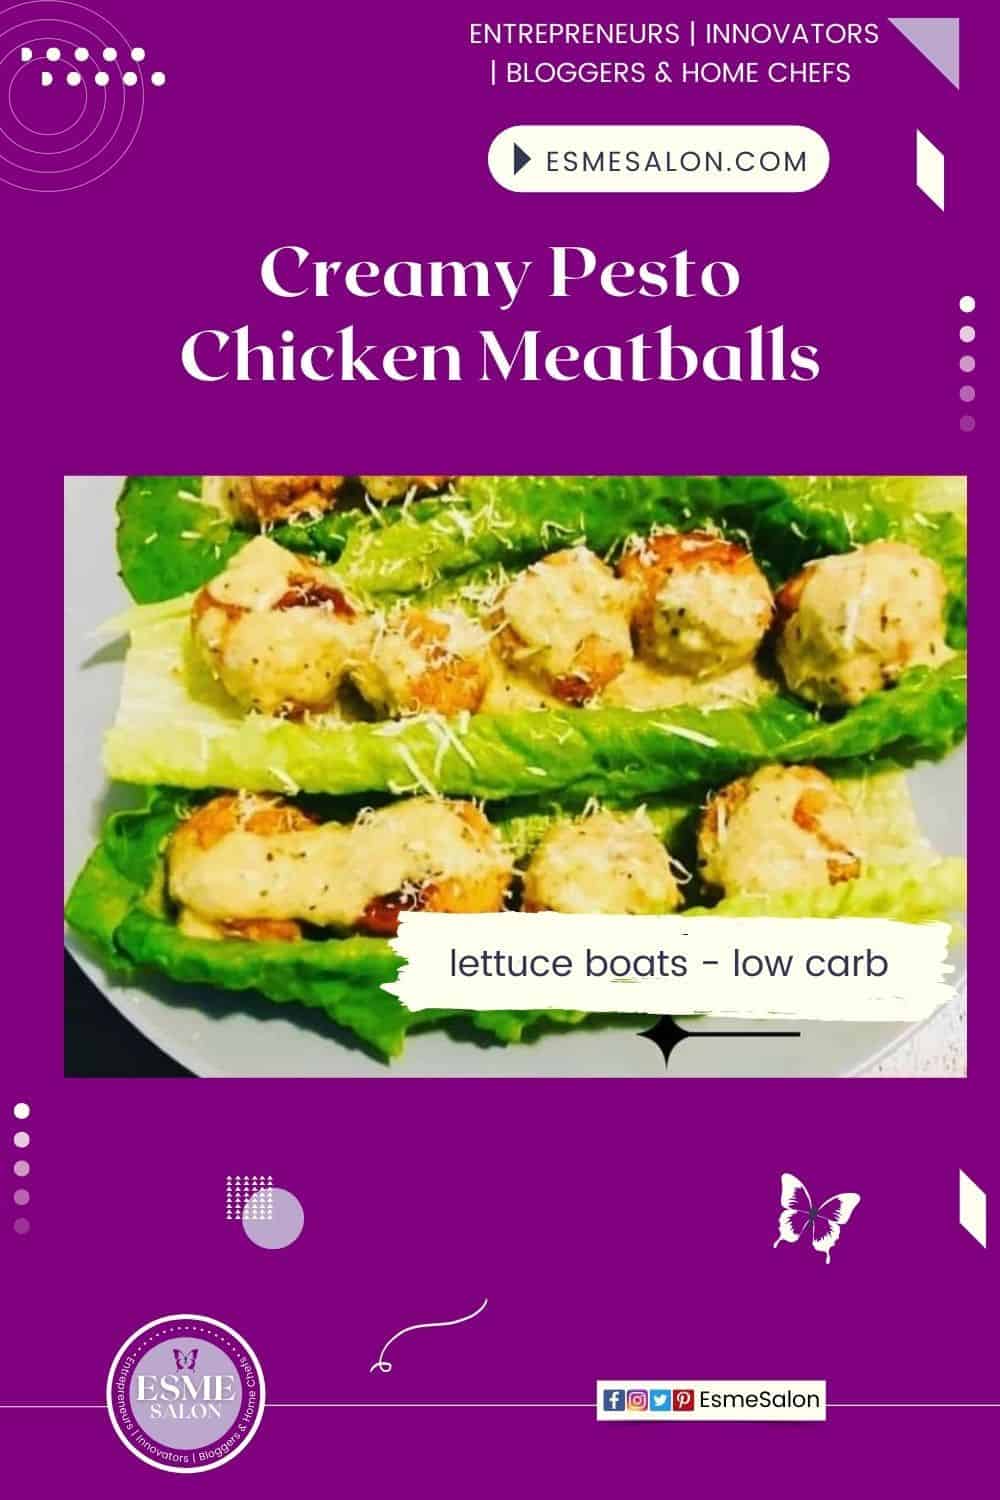 Creamy Pesto Chicken Meatballs placed in lettuce leaves on a white platter